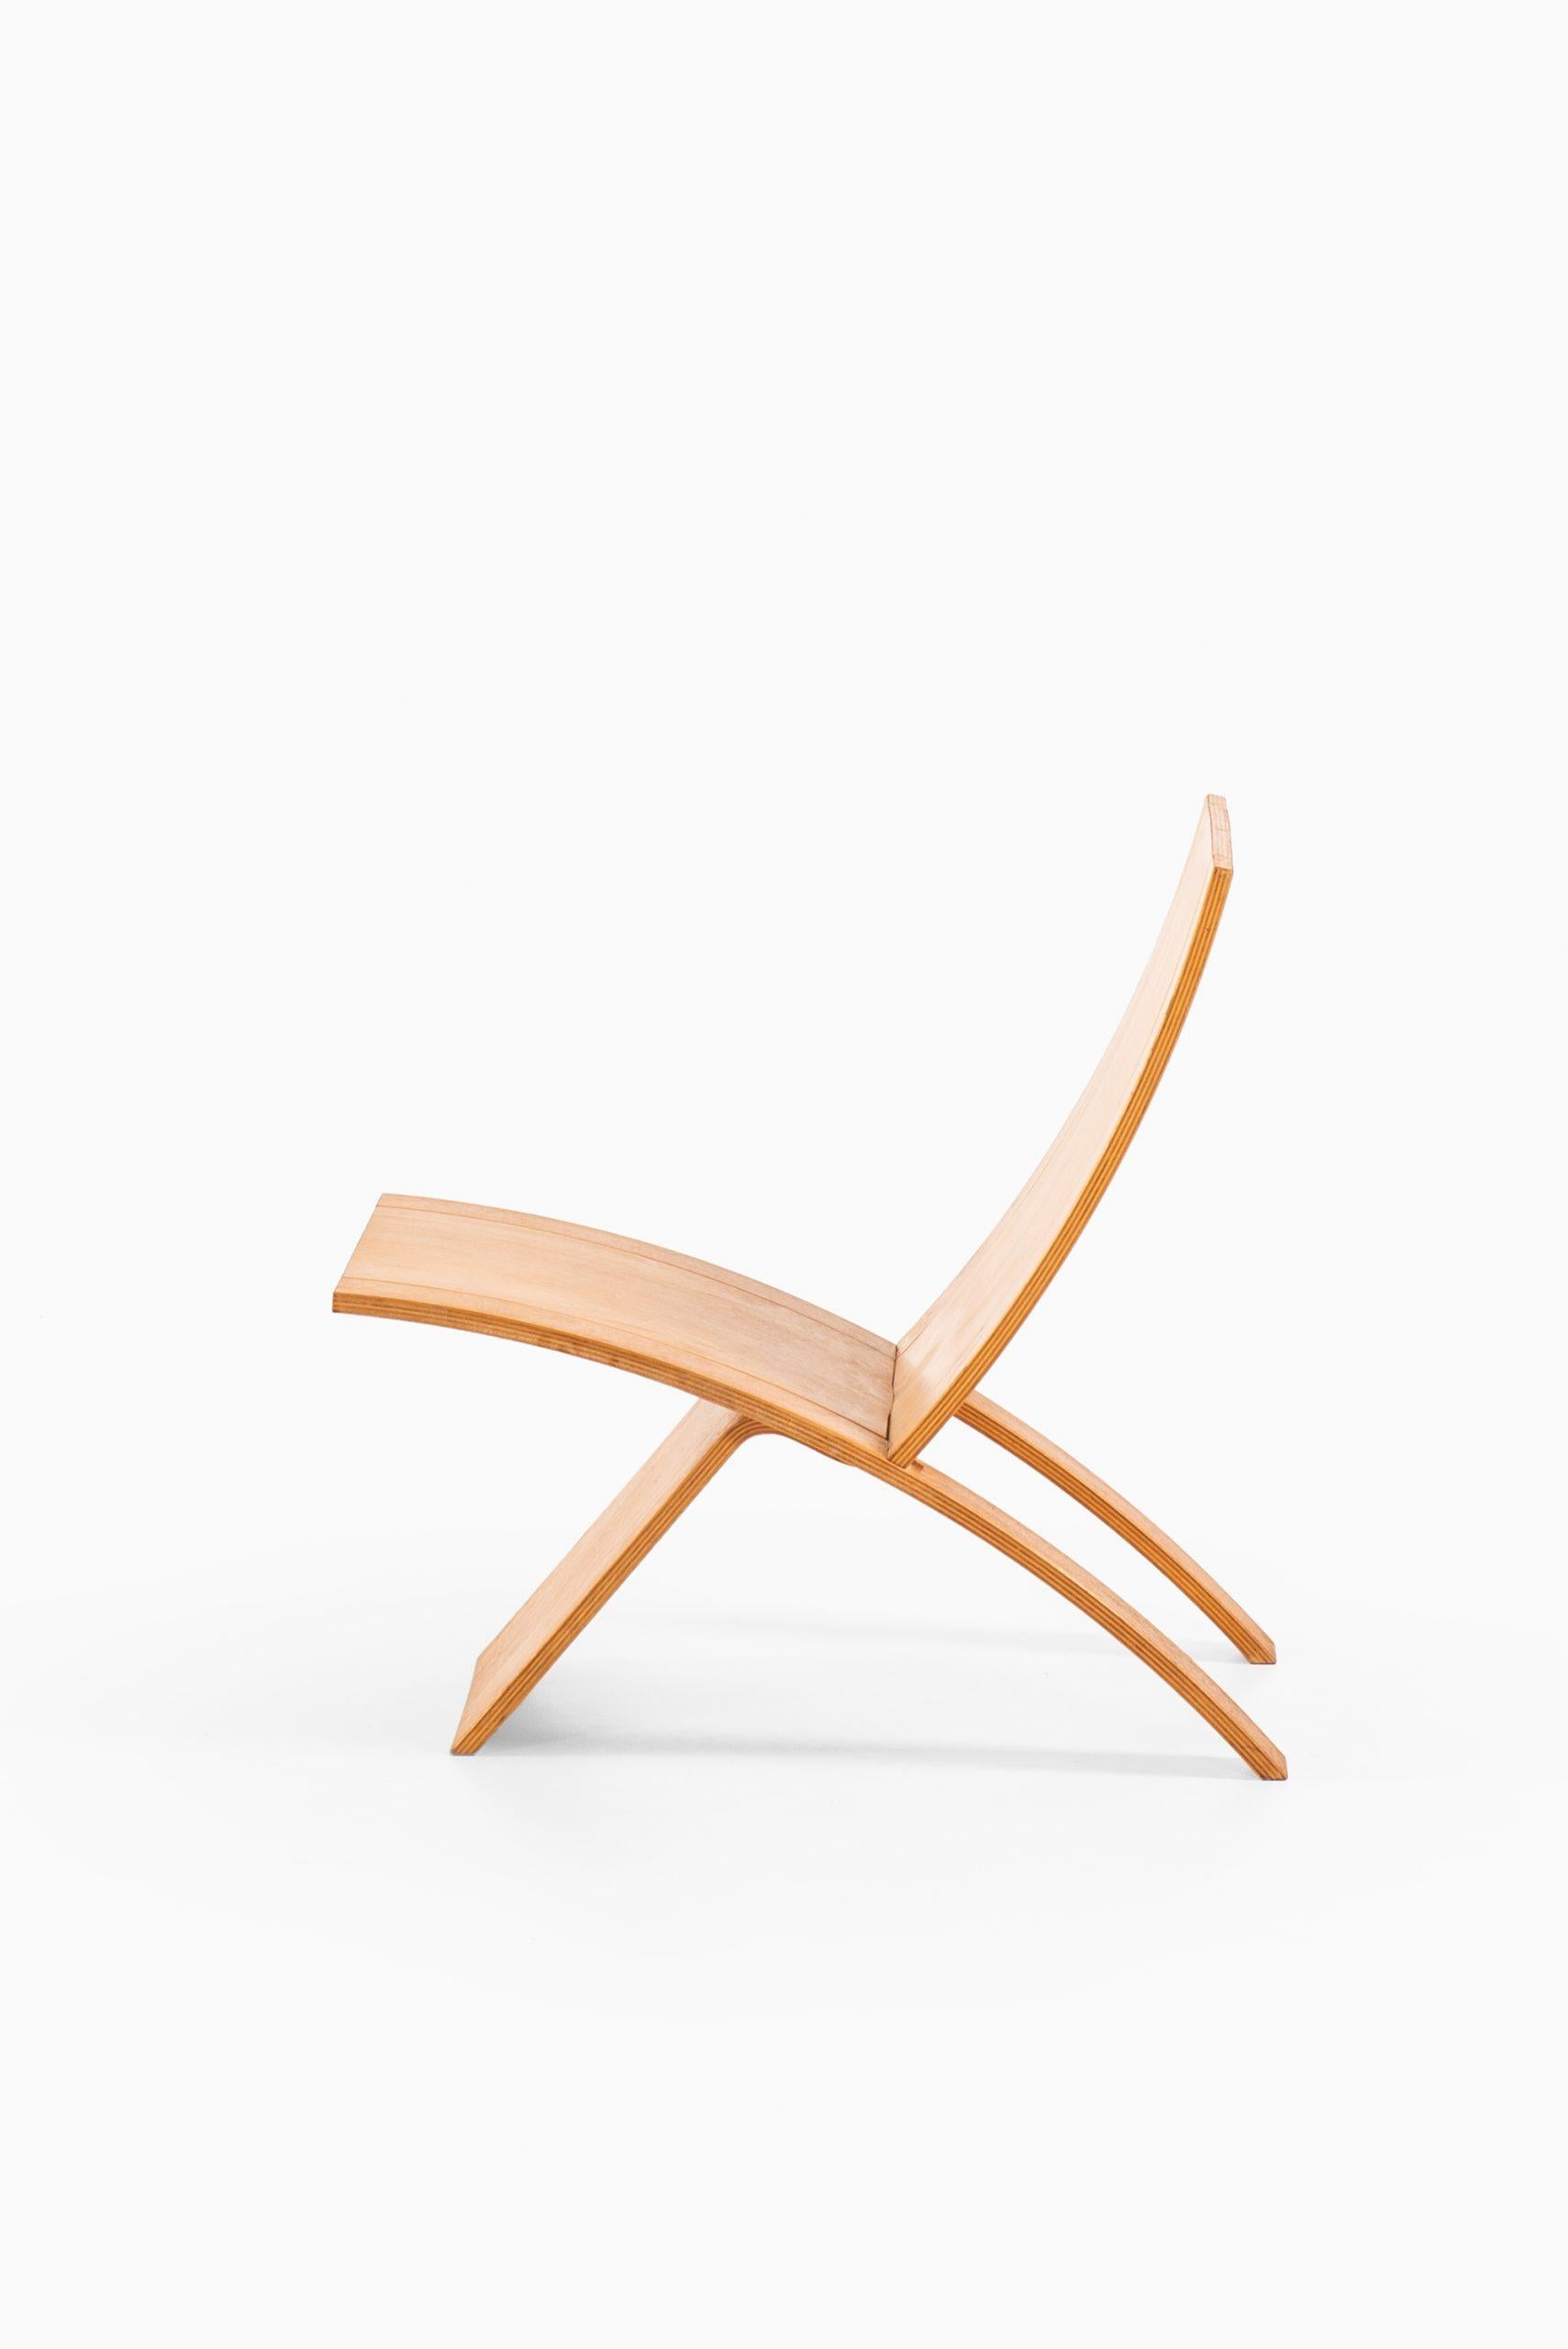 Rare easy chair model Laminex designed by Jens Nielson. Produced by Westnofa in Norway.